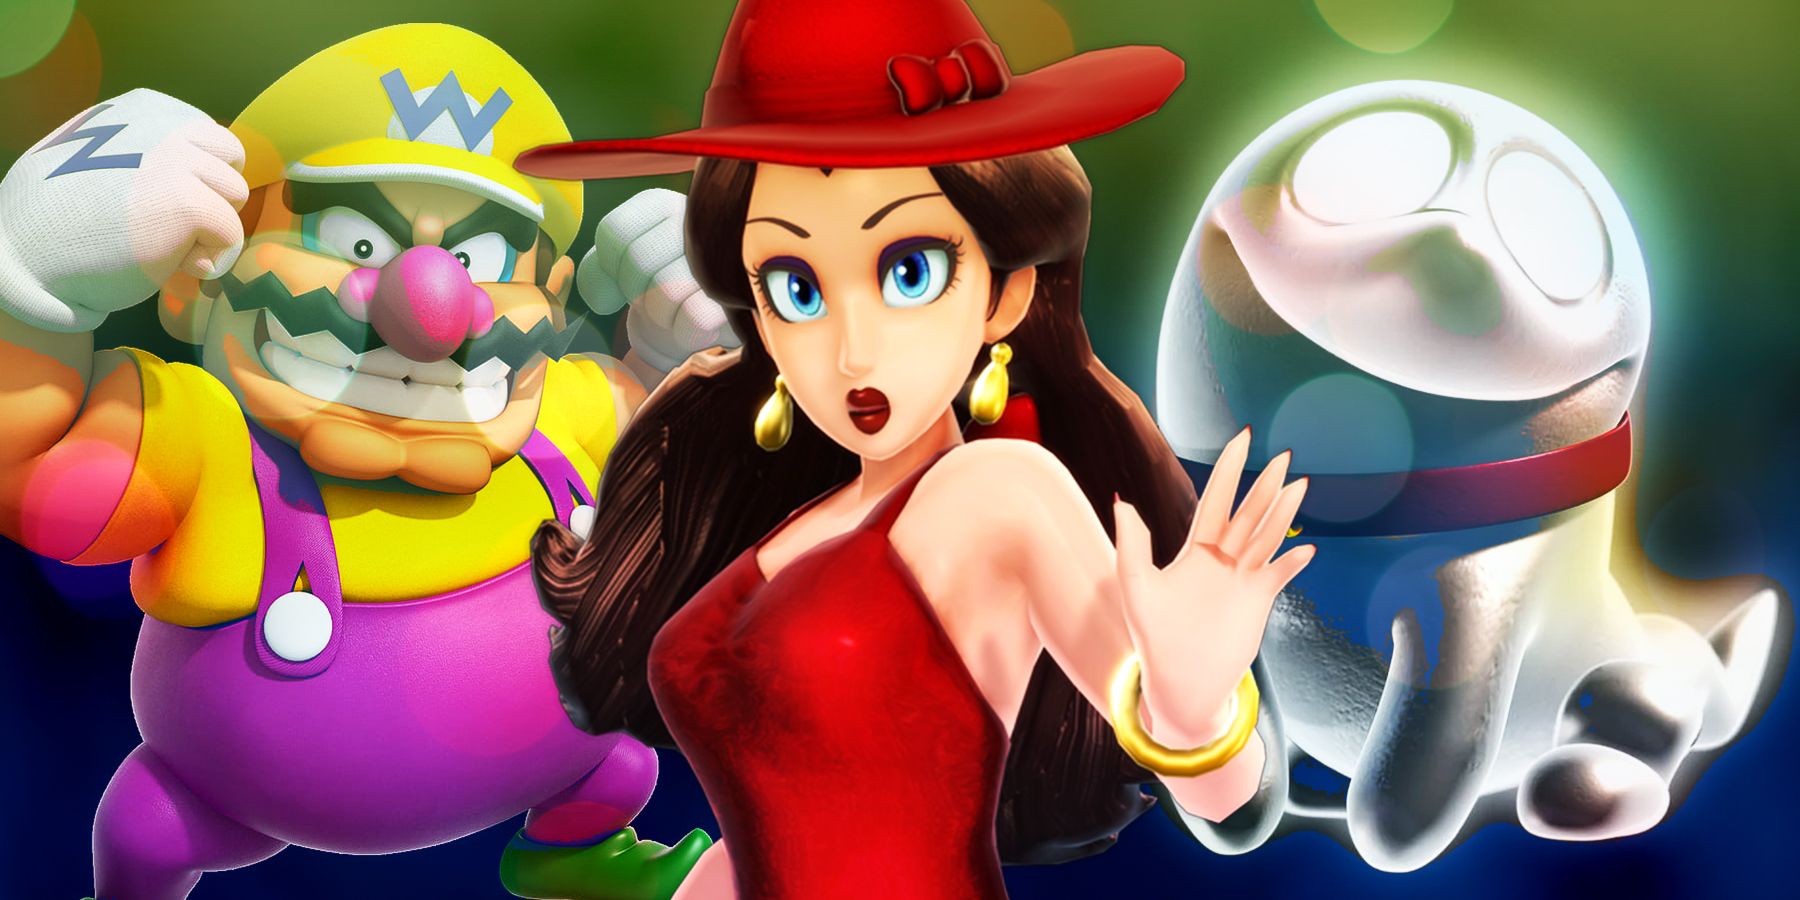 Wario as seen in Super Mario Party, Pauline from game Super Mario Odyssey and Polterpup form game Luigi's Mansion